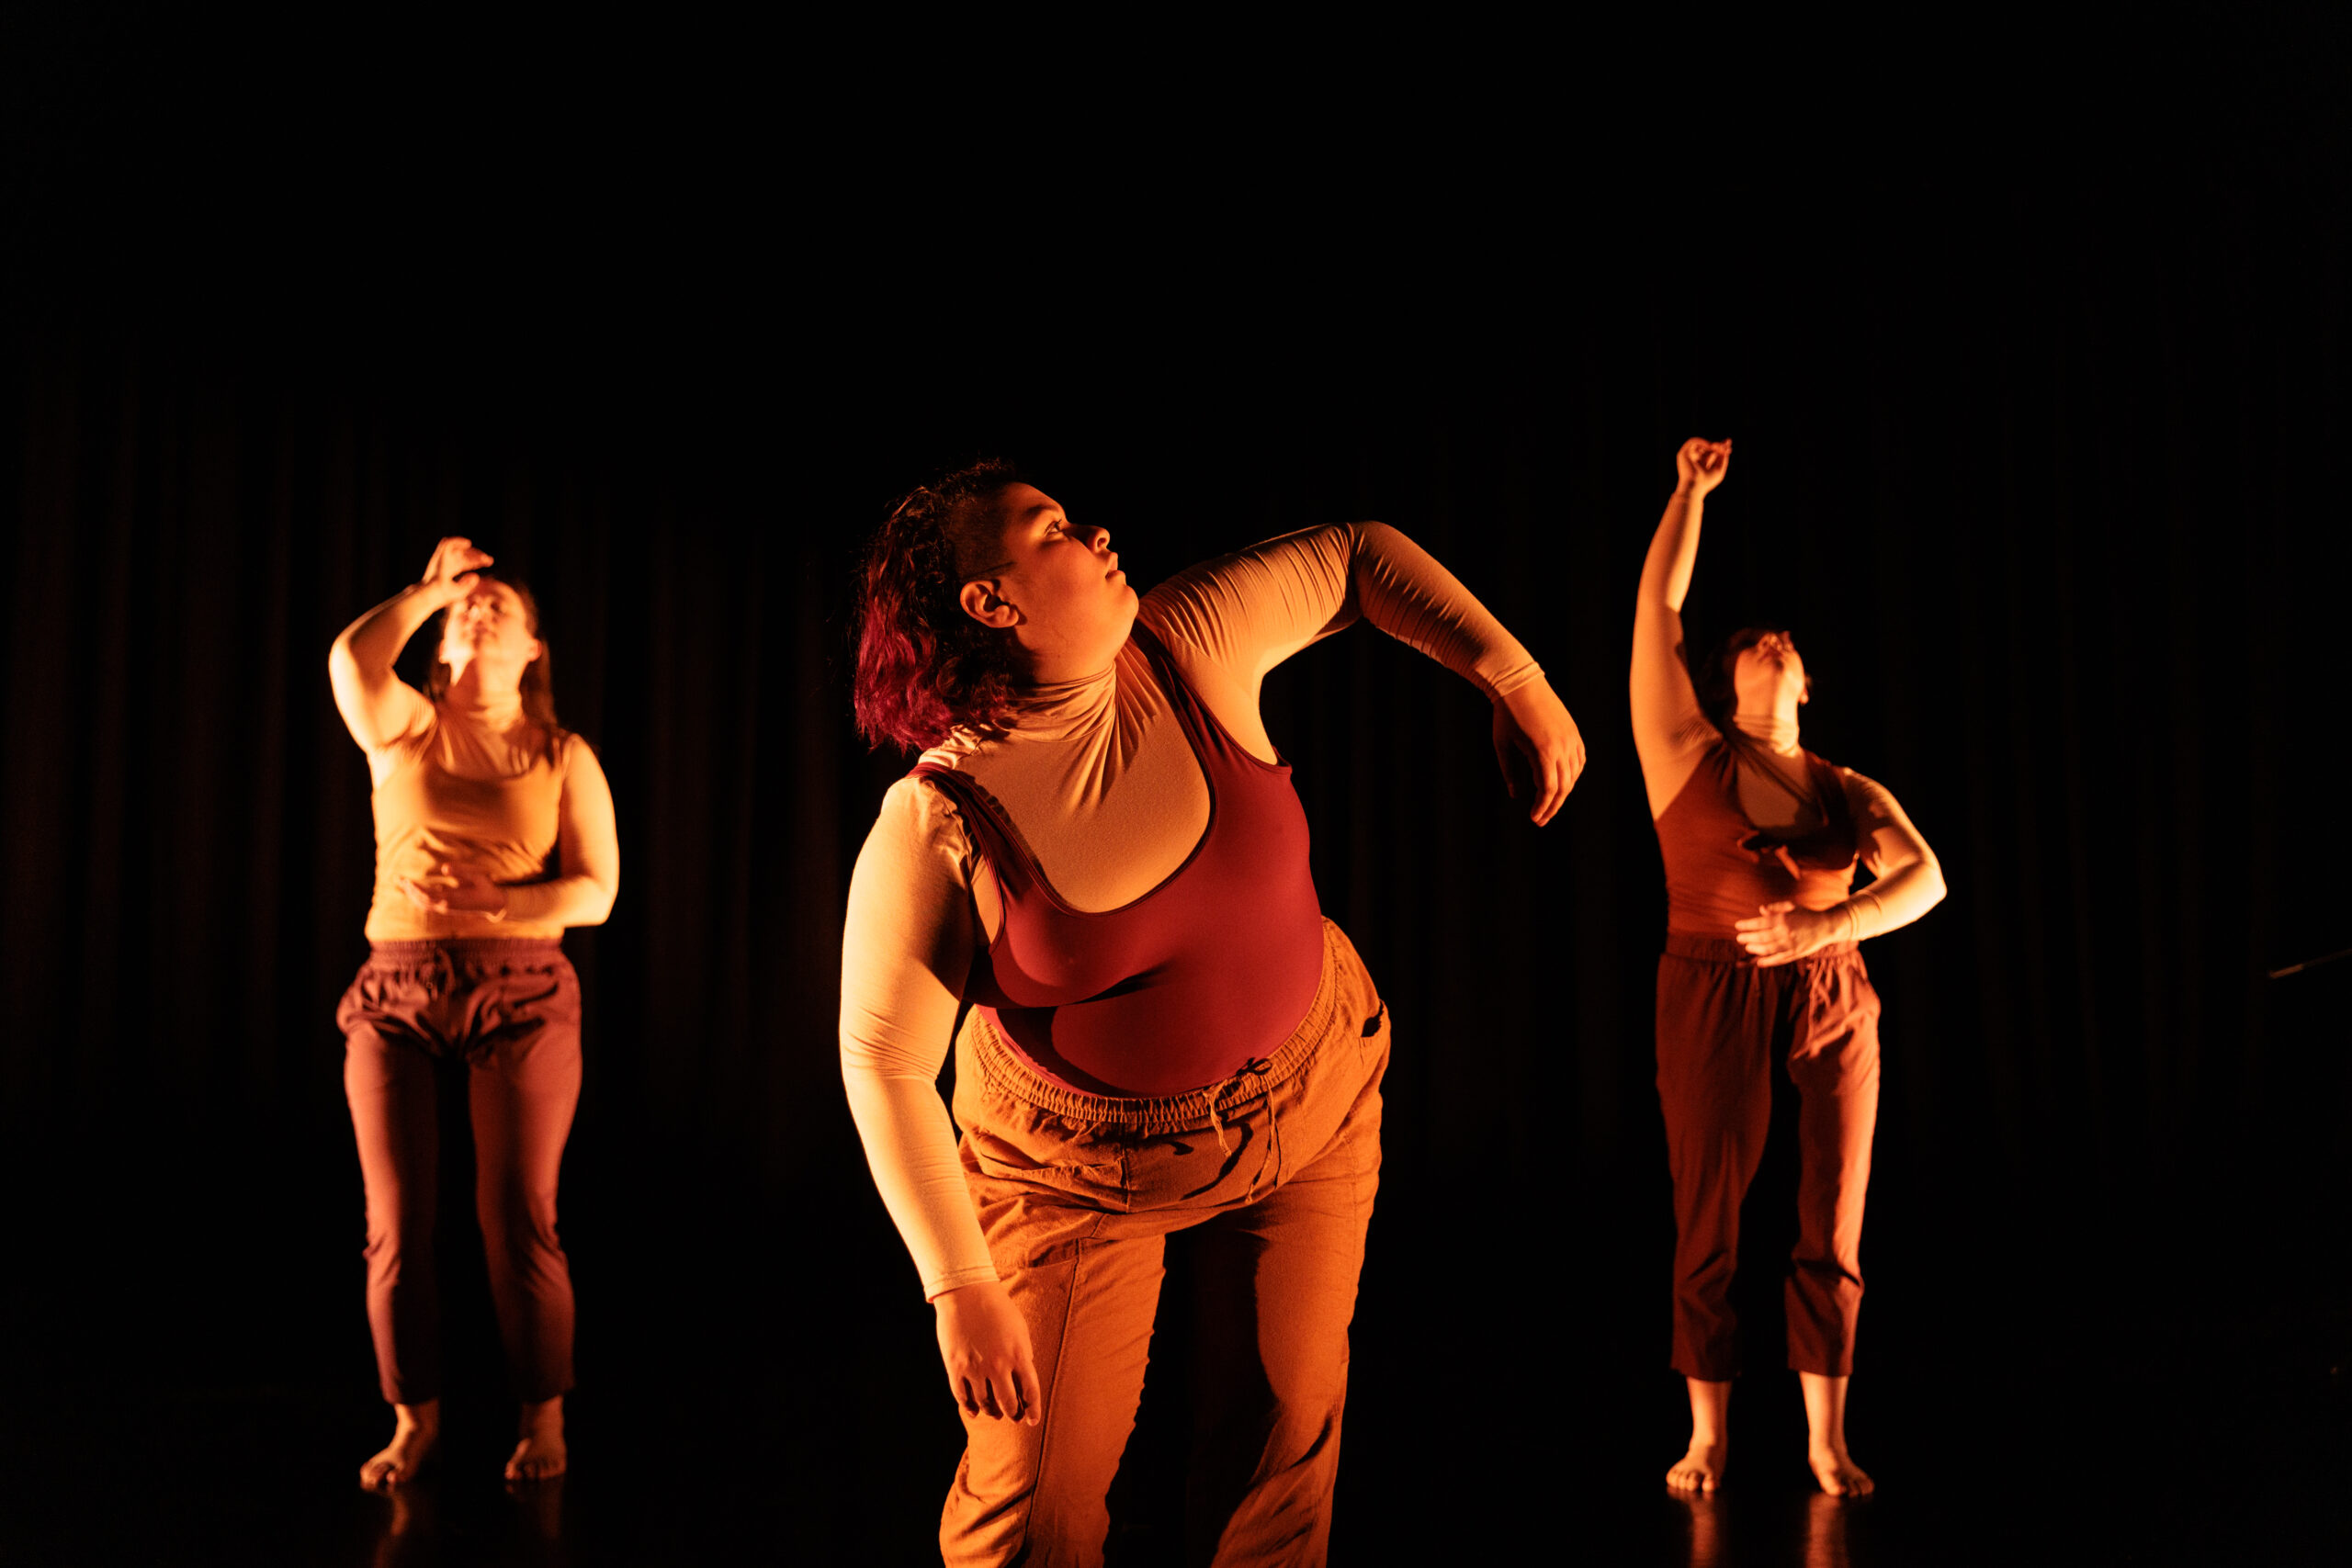 Three dancers in warm beiges and browns hold different shapes with grace